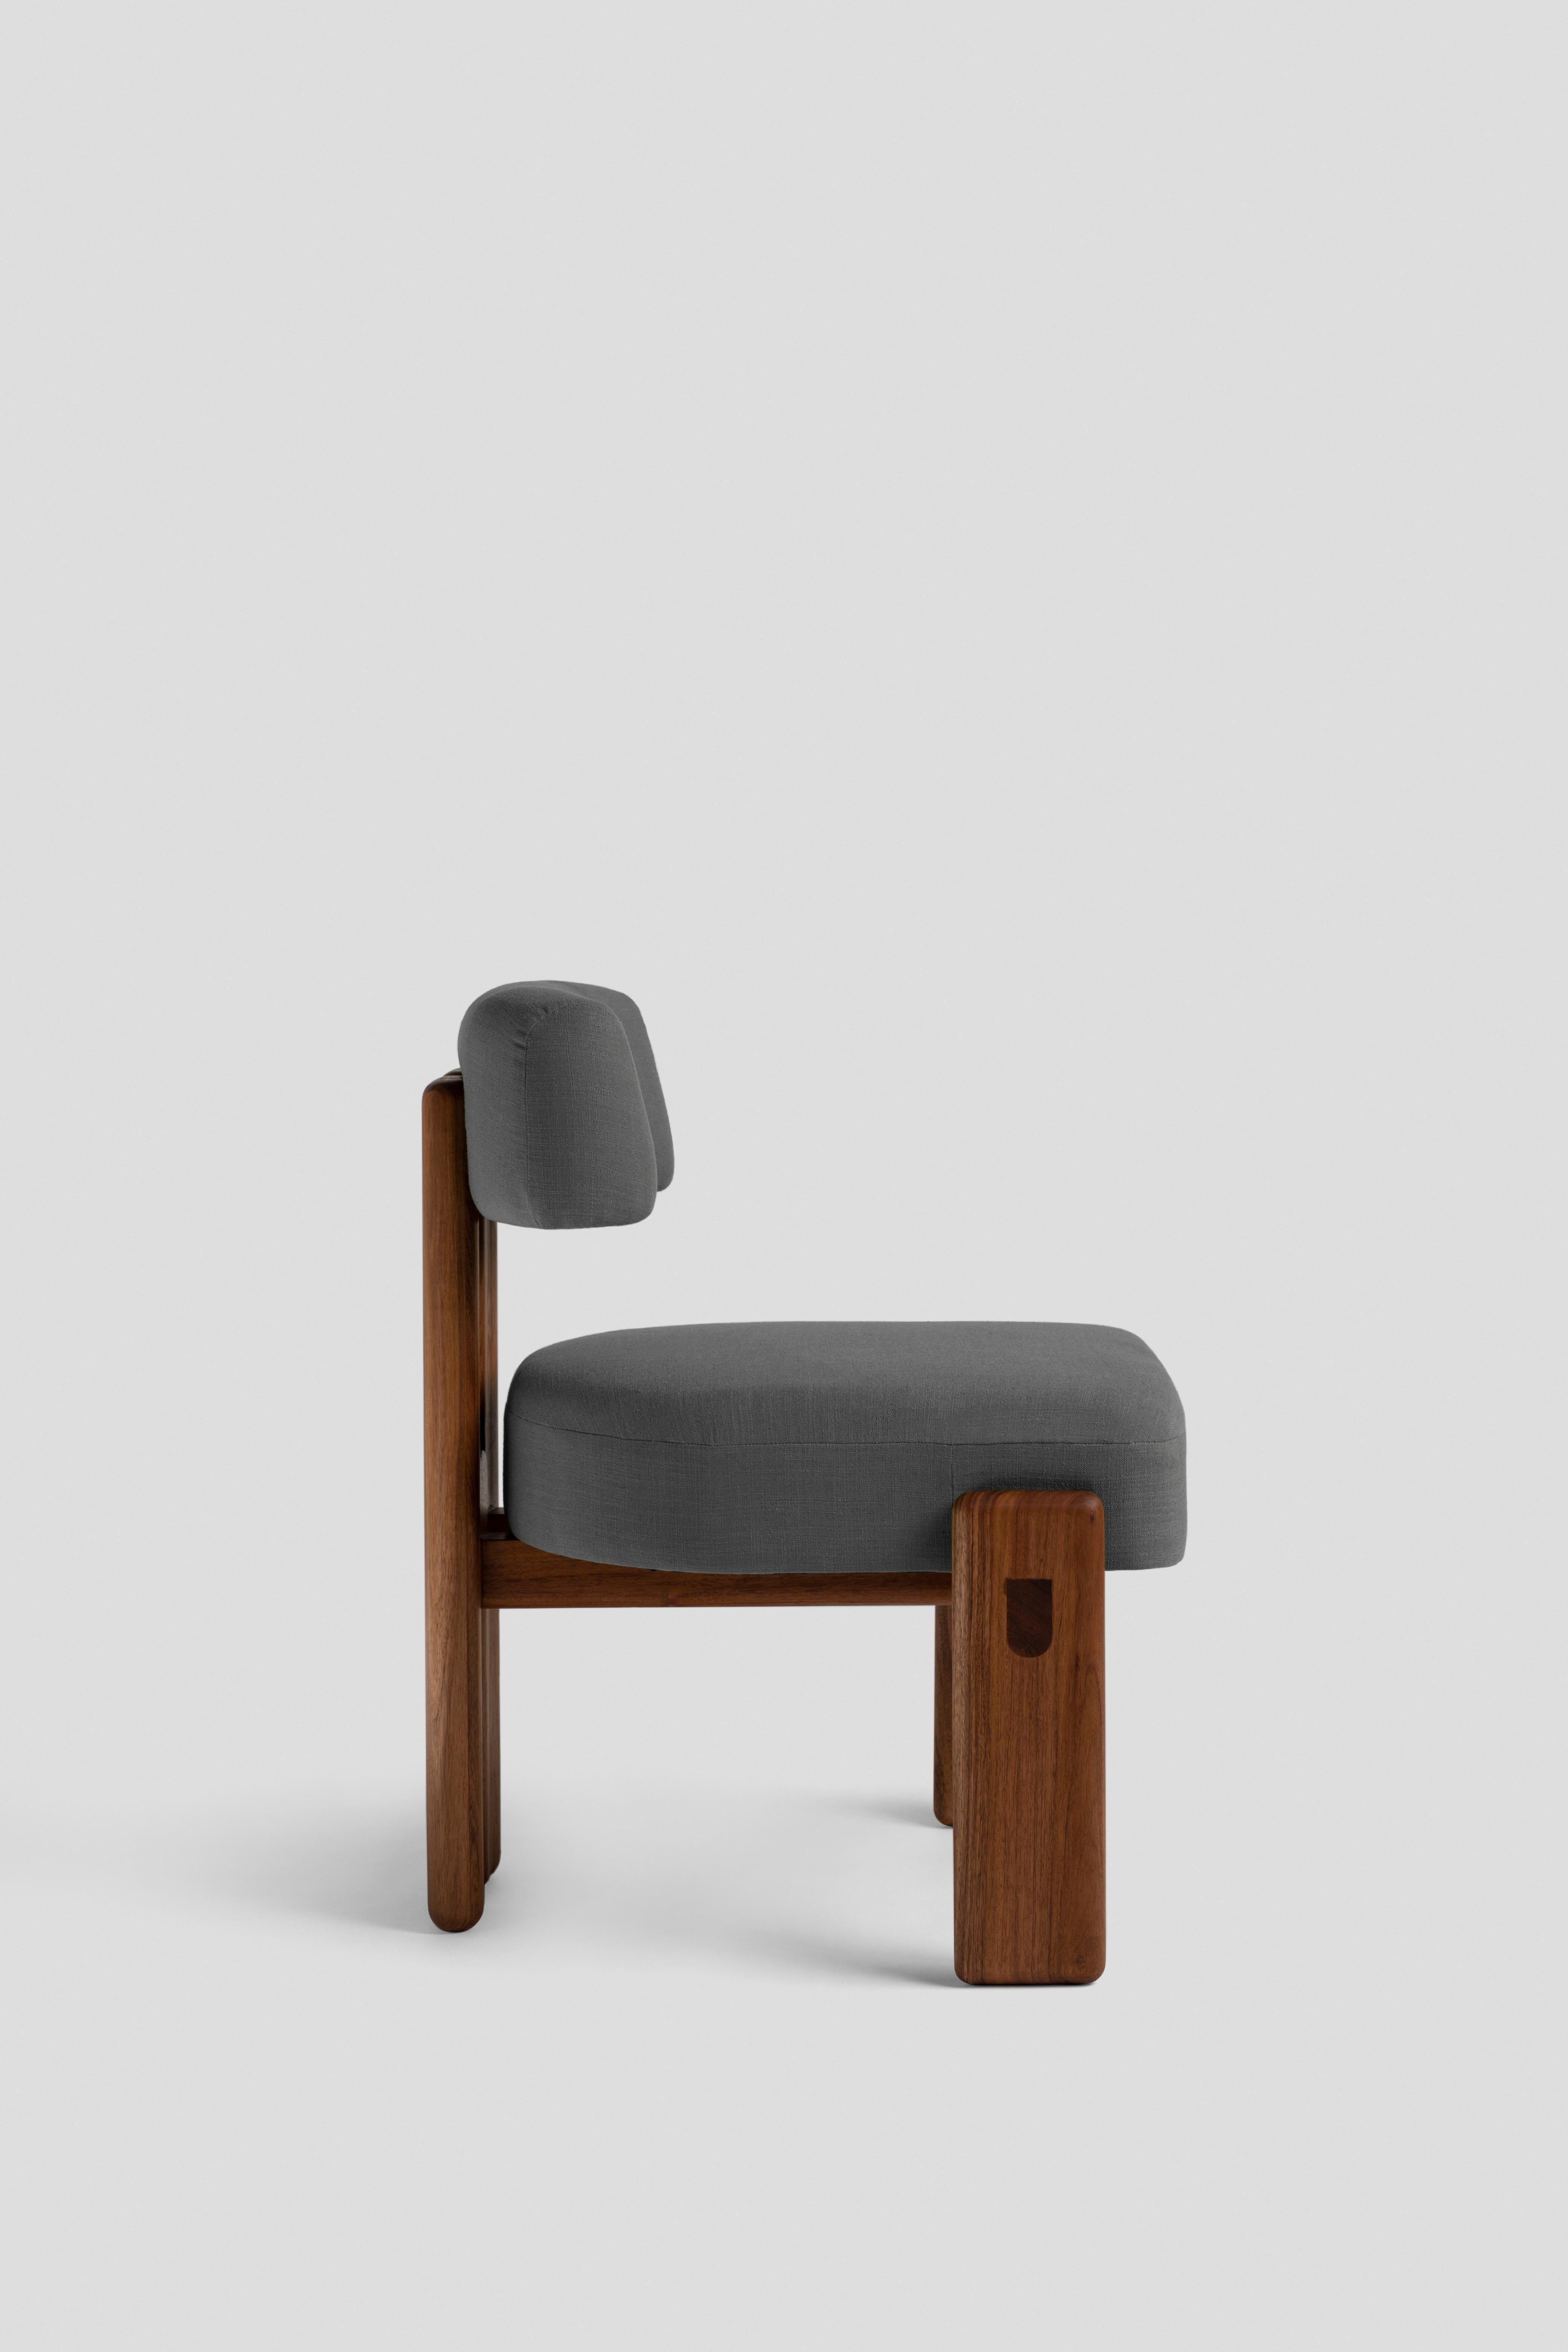 Chair with seat and back upholstered in fabric.
The backrest formed by a half-moon hugs the back giving it support. Inspired by the three-legged chairs, the Peace chair has a back leg formed by two pieces joined together by means of a wooden circle